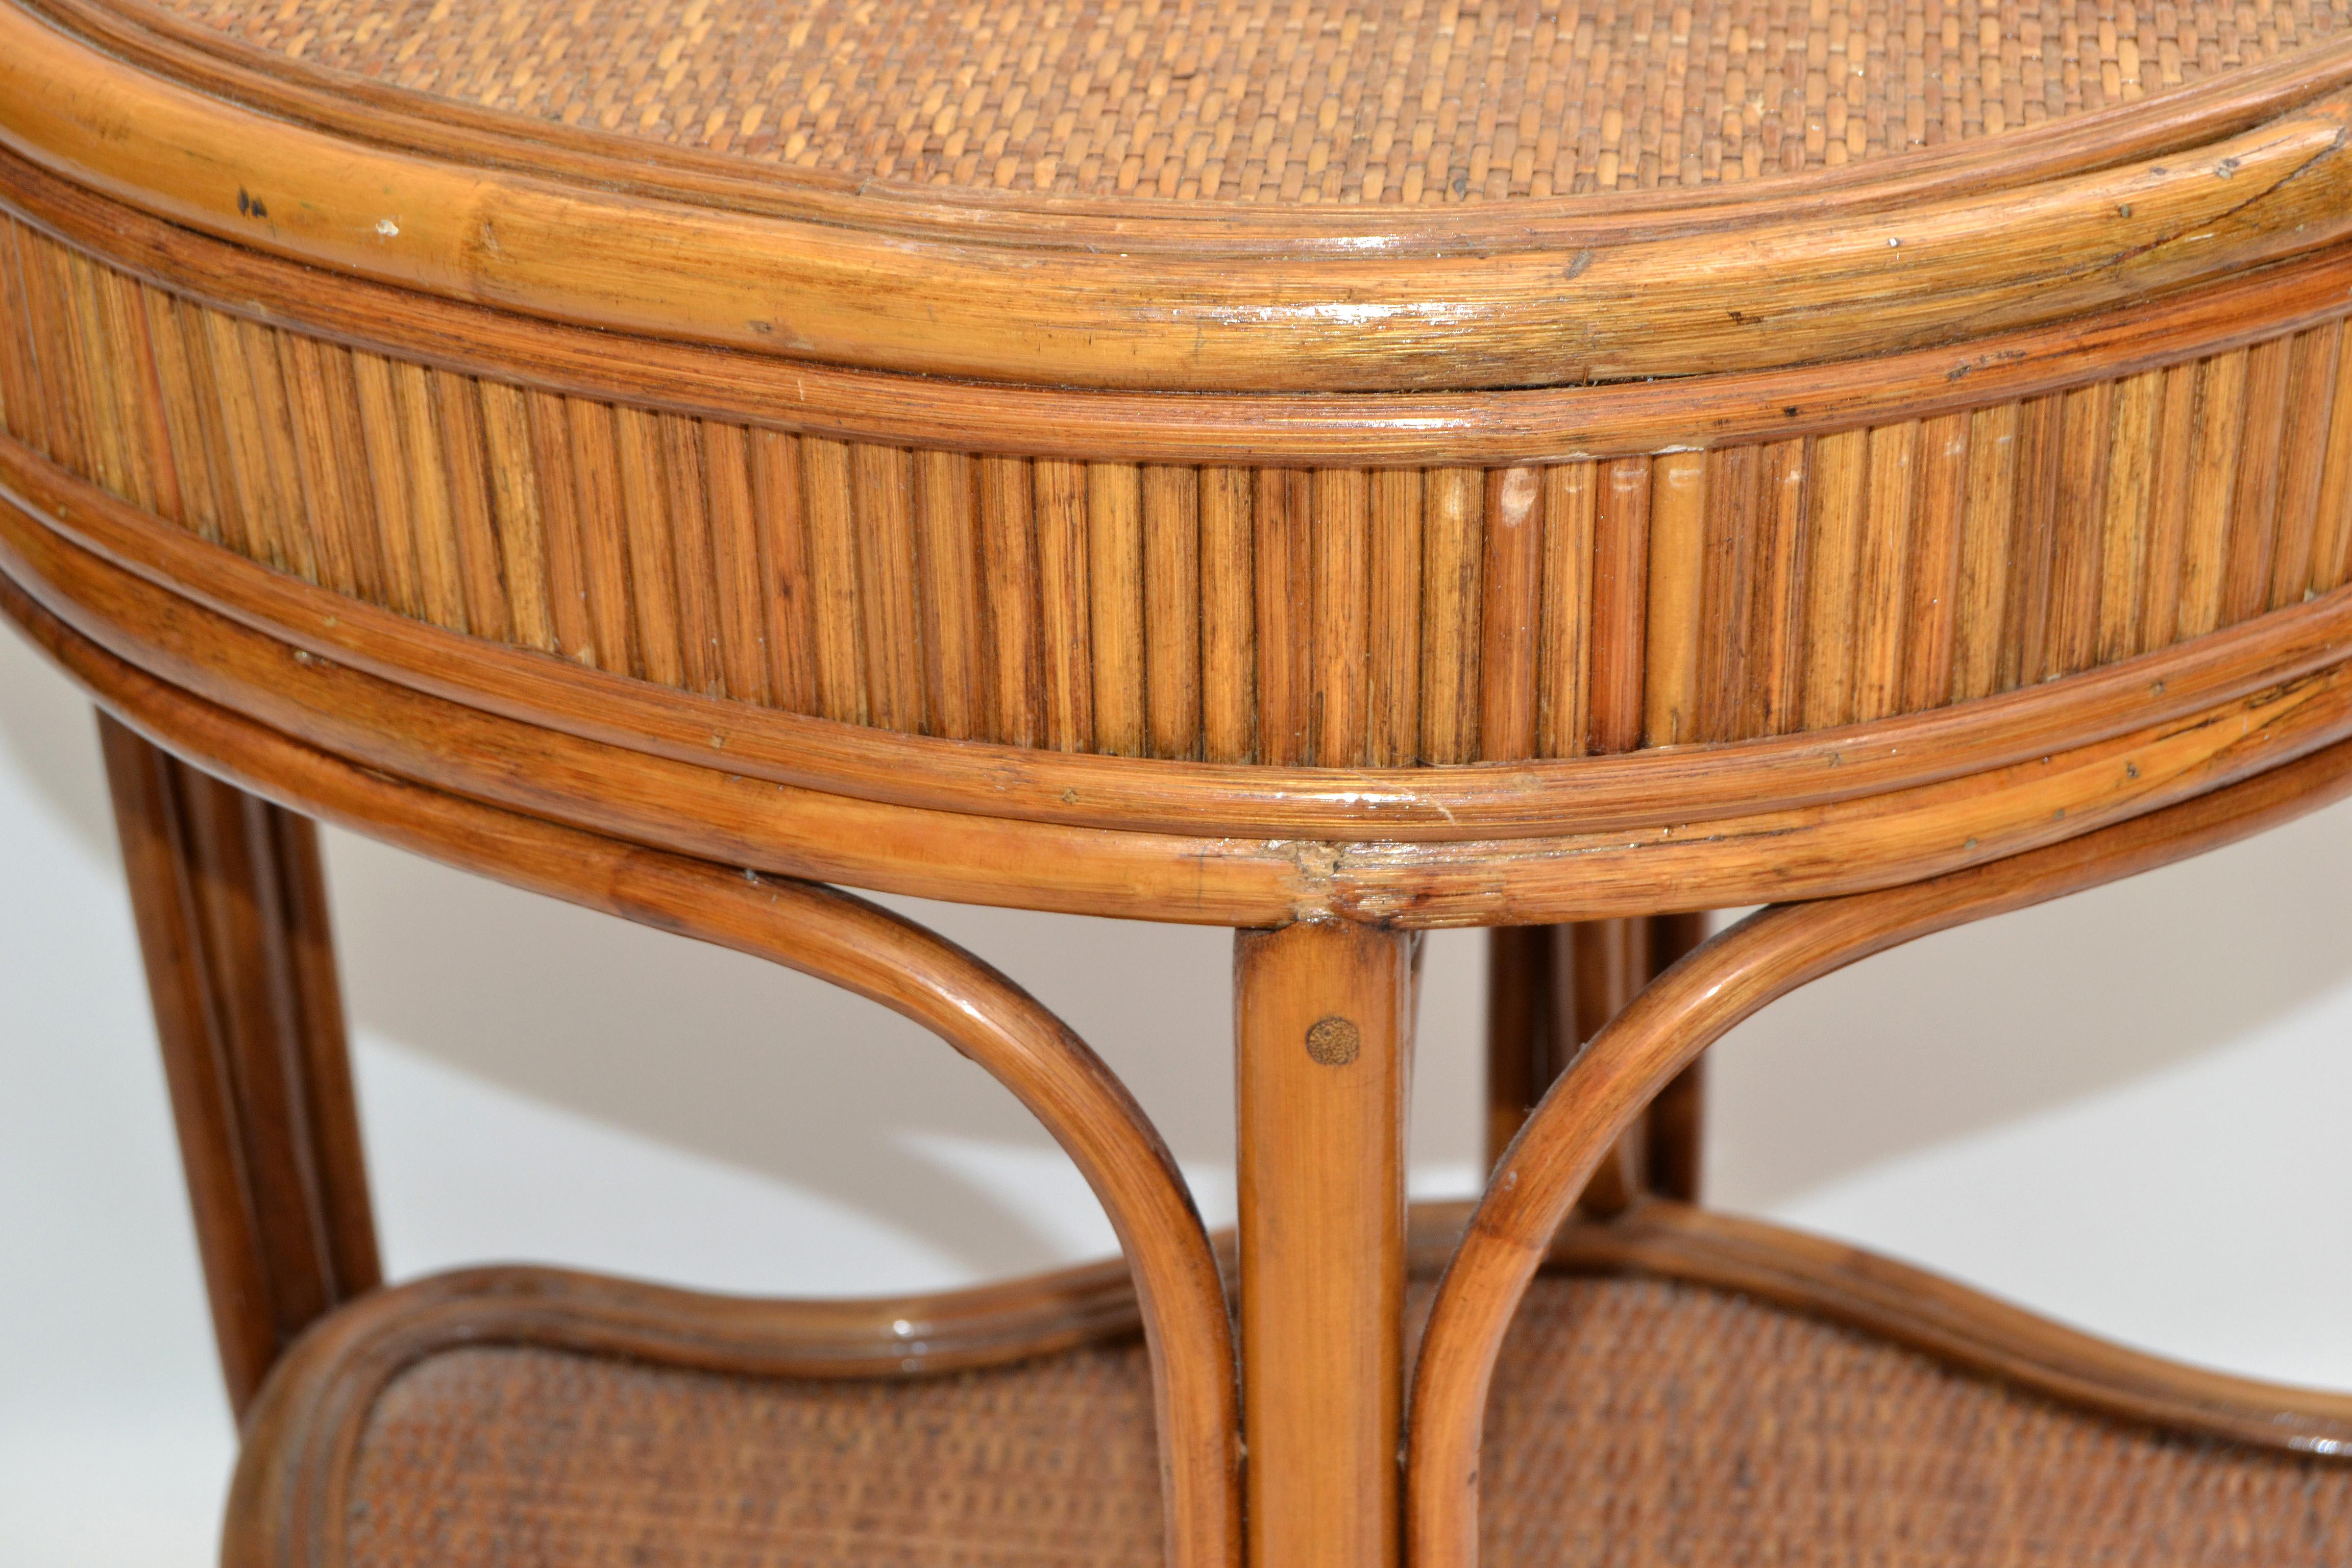 Chinoiserie Bamboo & Rattan Handmade Two-Tier Side, End Table Asian Modern 70s For Sale 6